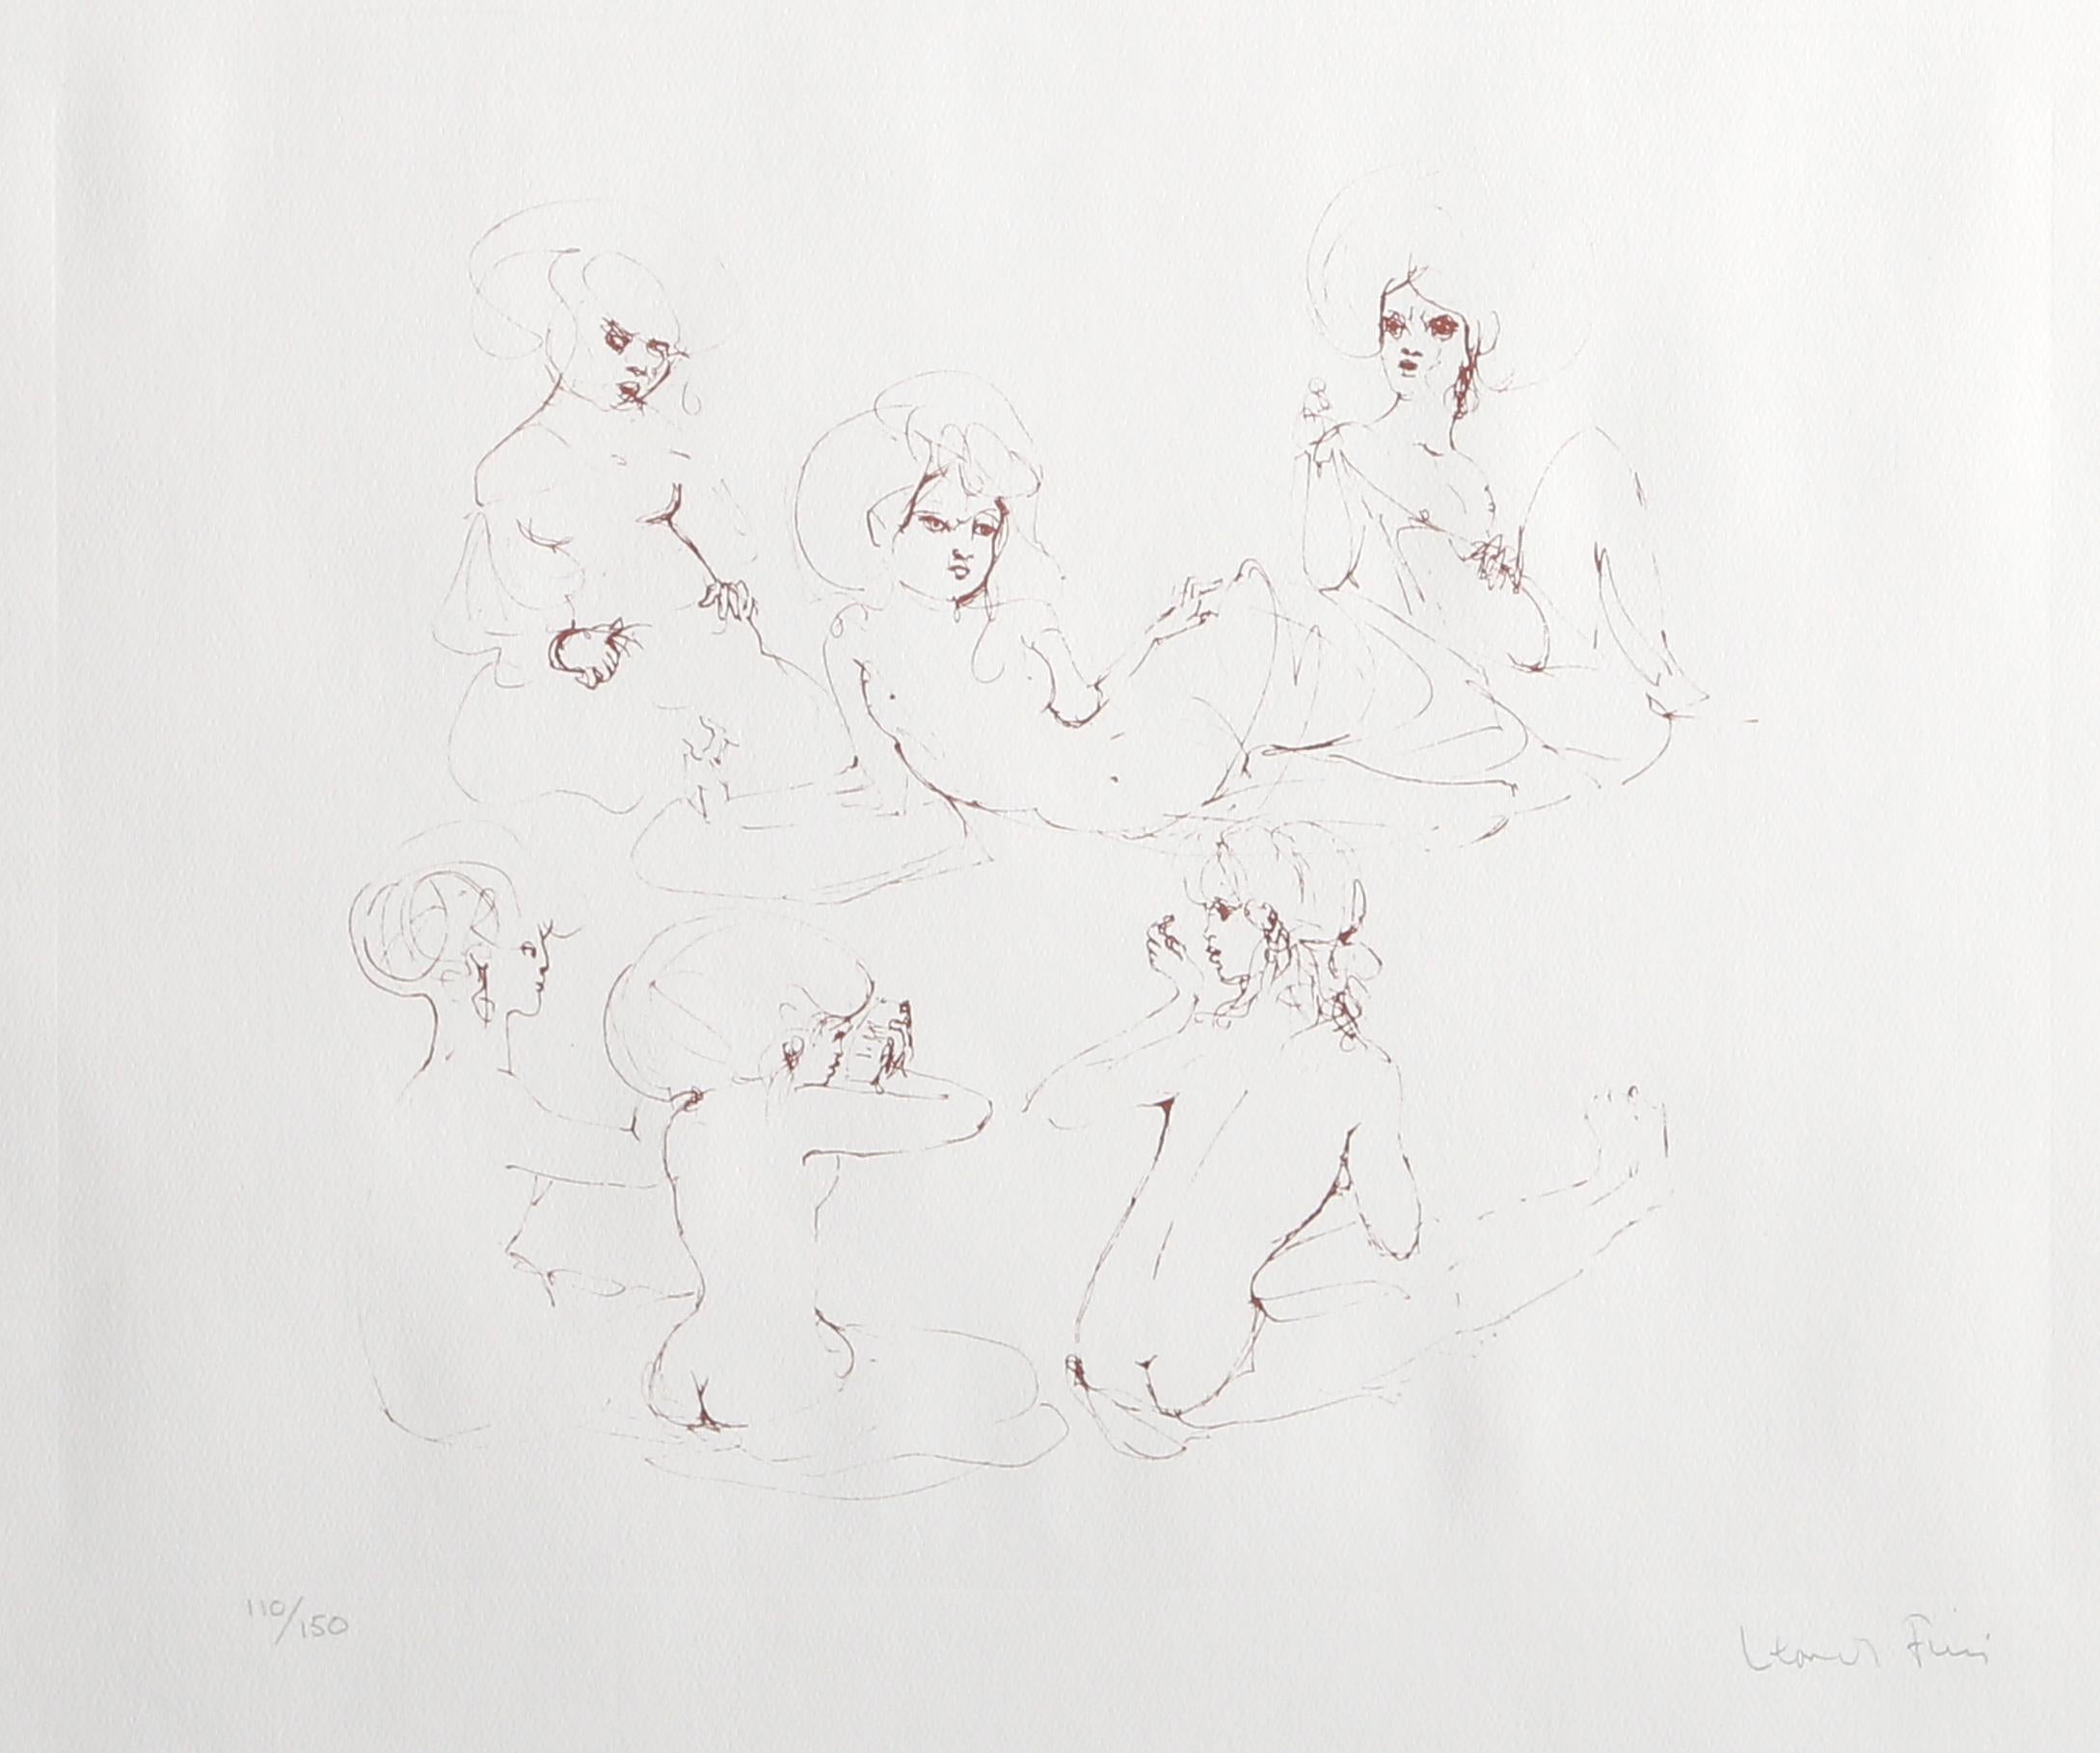 Artist: Leonor Fini
Title: Six Nudes
Year: circa 1970
Medium: Etching, Signed and Numbered in Pencil
Edition: 110/150
Size: 12  x 15.5 in. (30.48  x 39.37 cm)
Frame Size: 22 x 26 inches